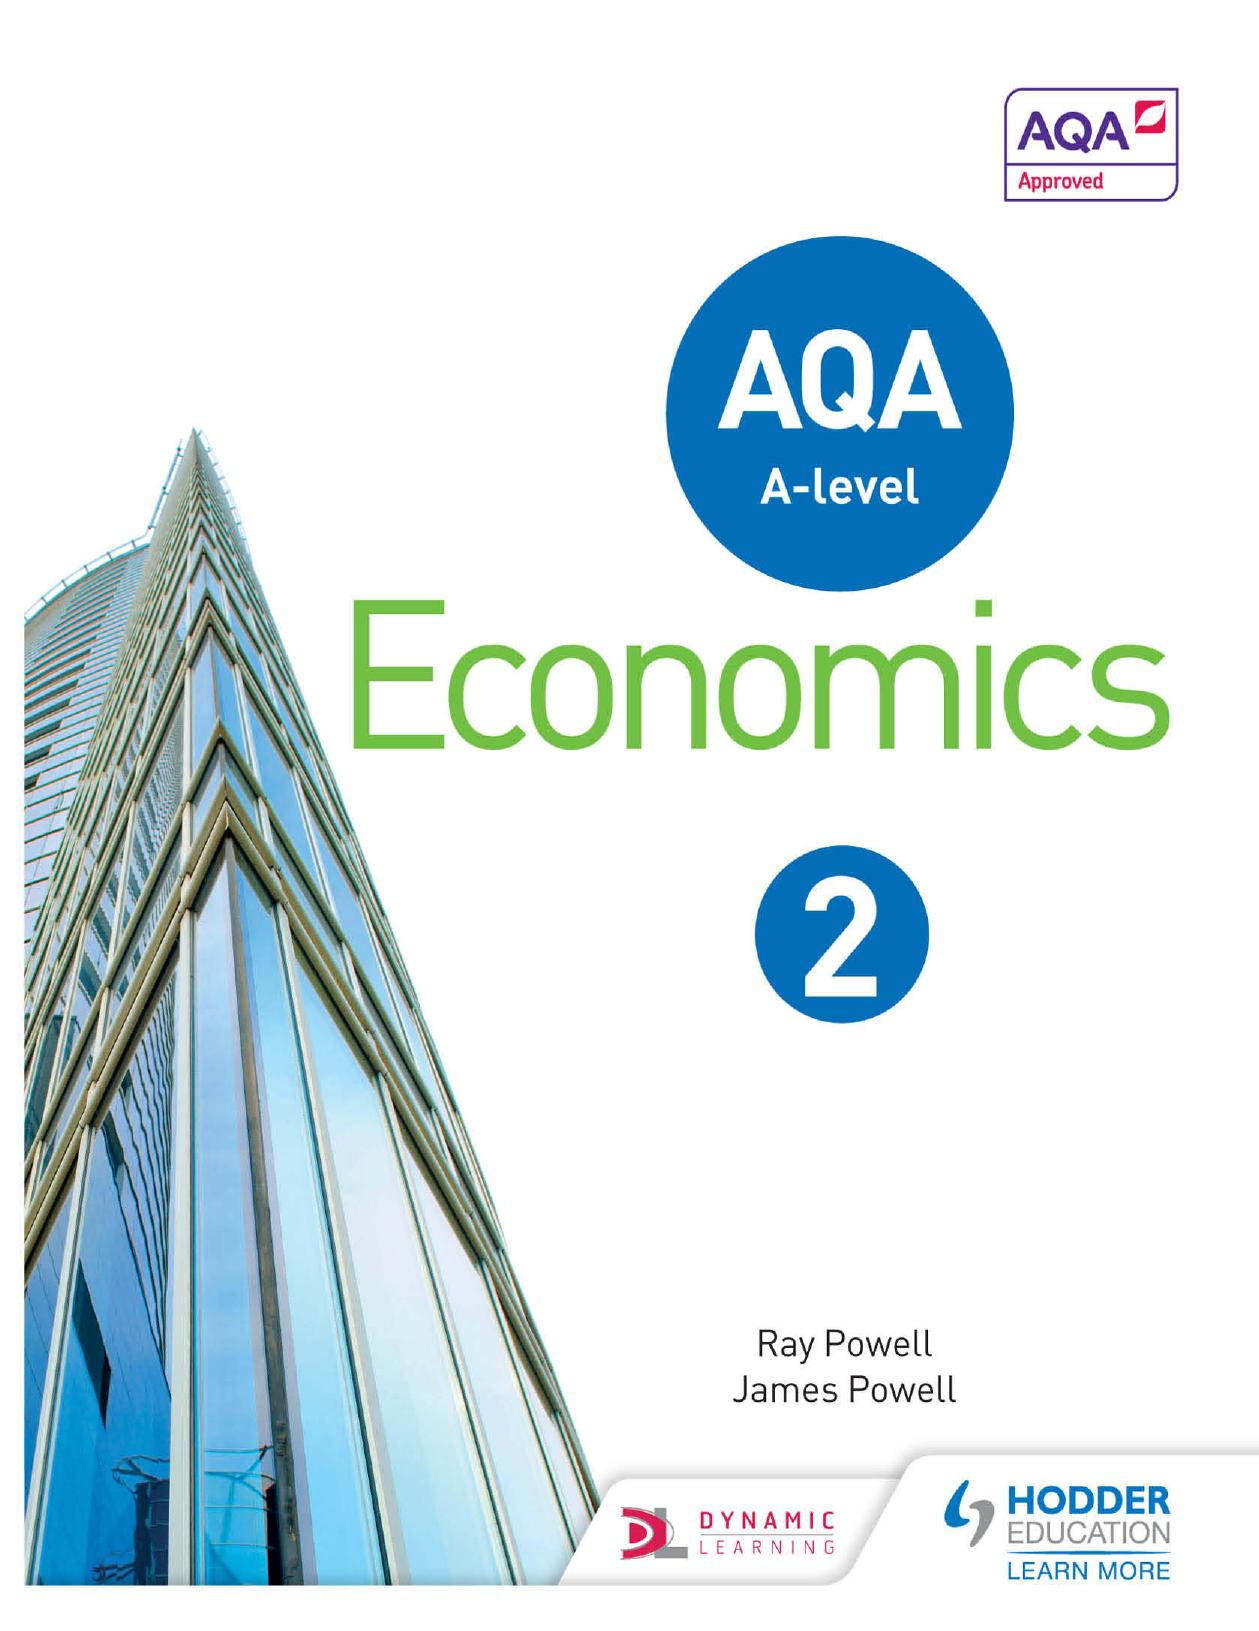 AQA A-level Economics Book 2  by Ray Powell , James Powell